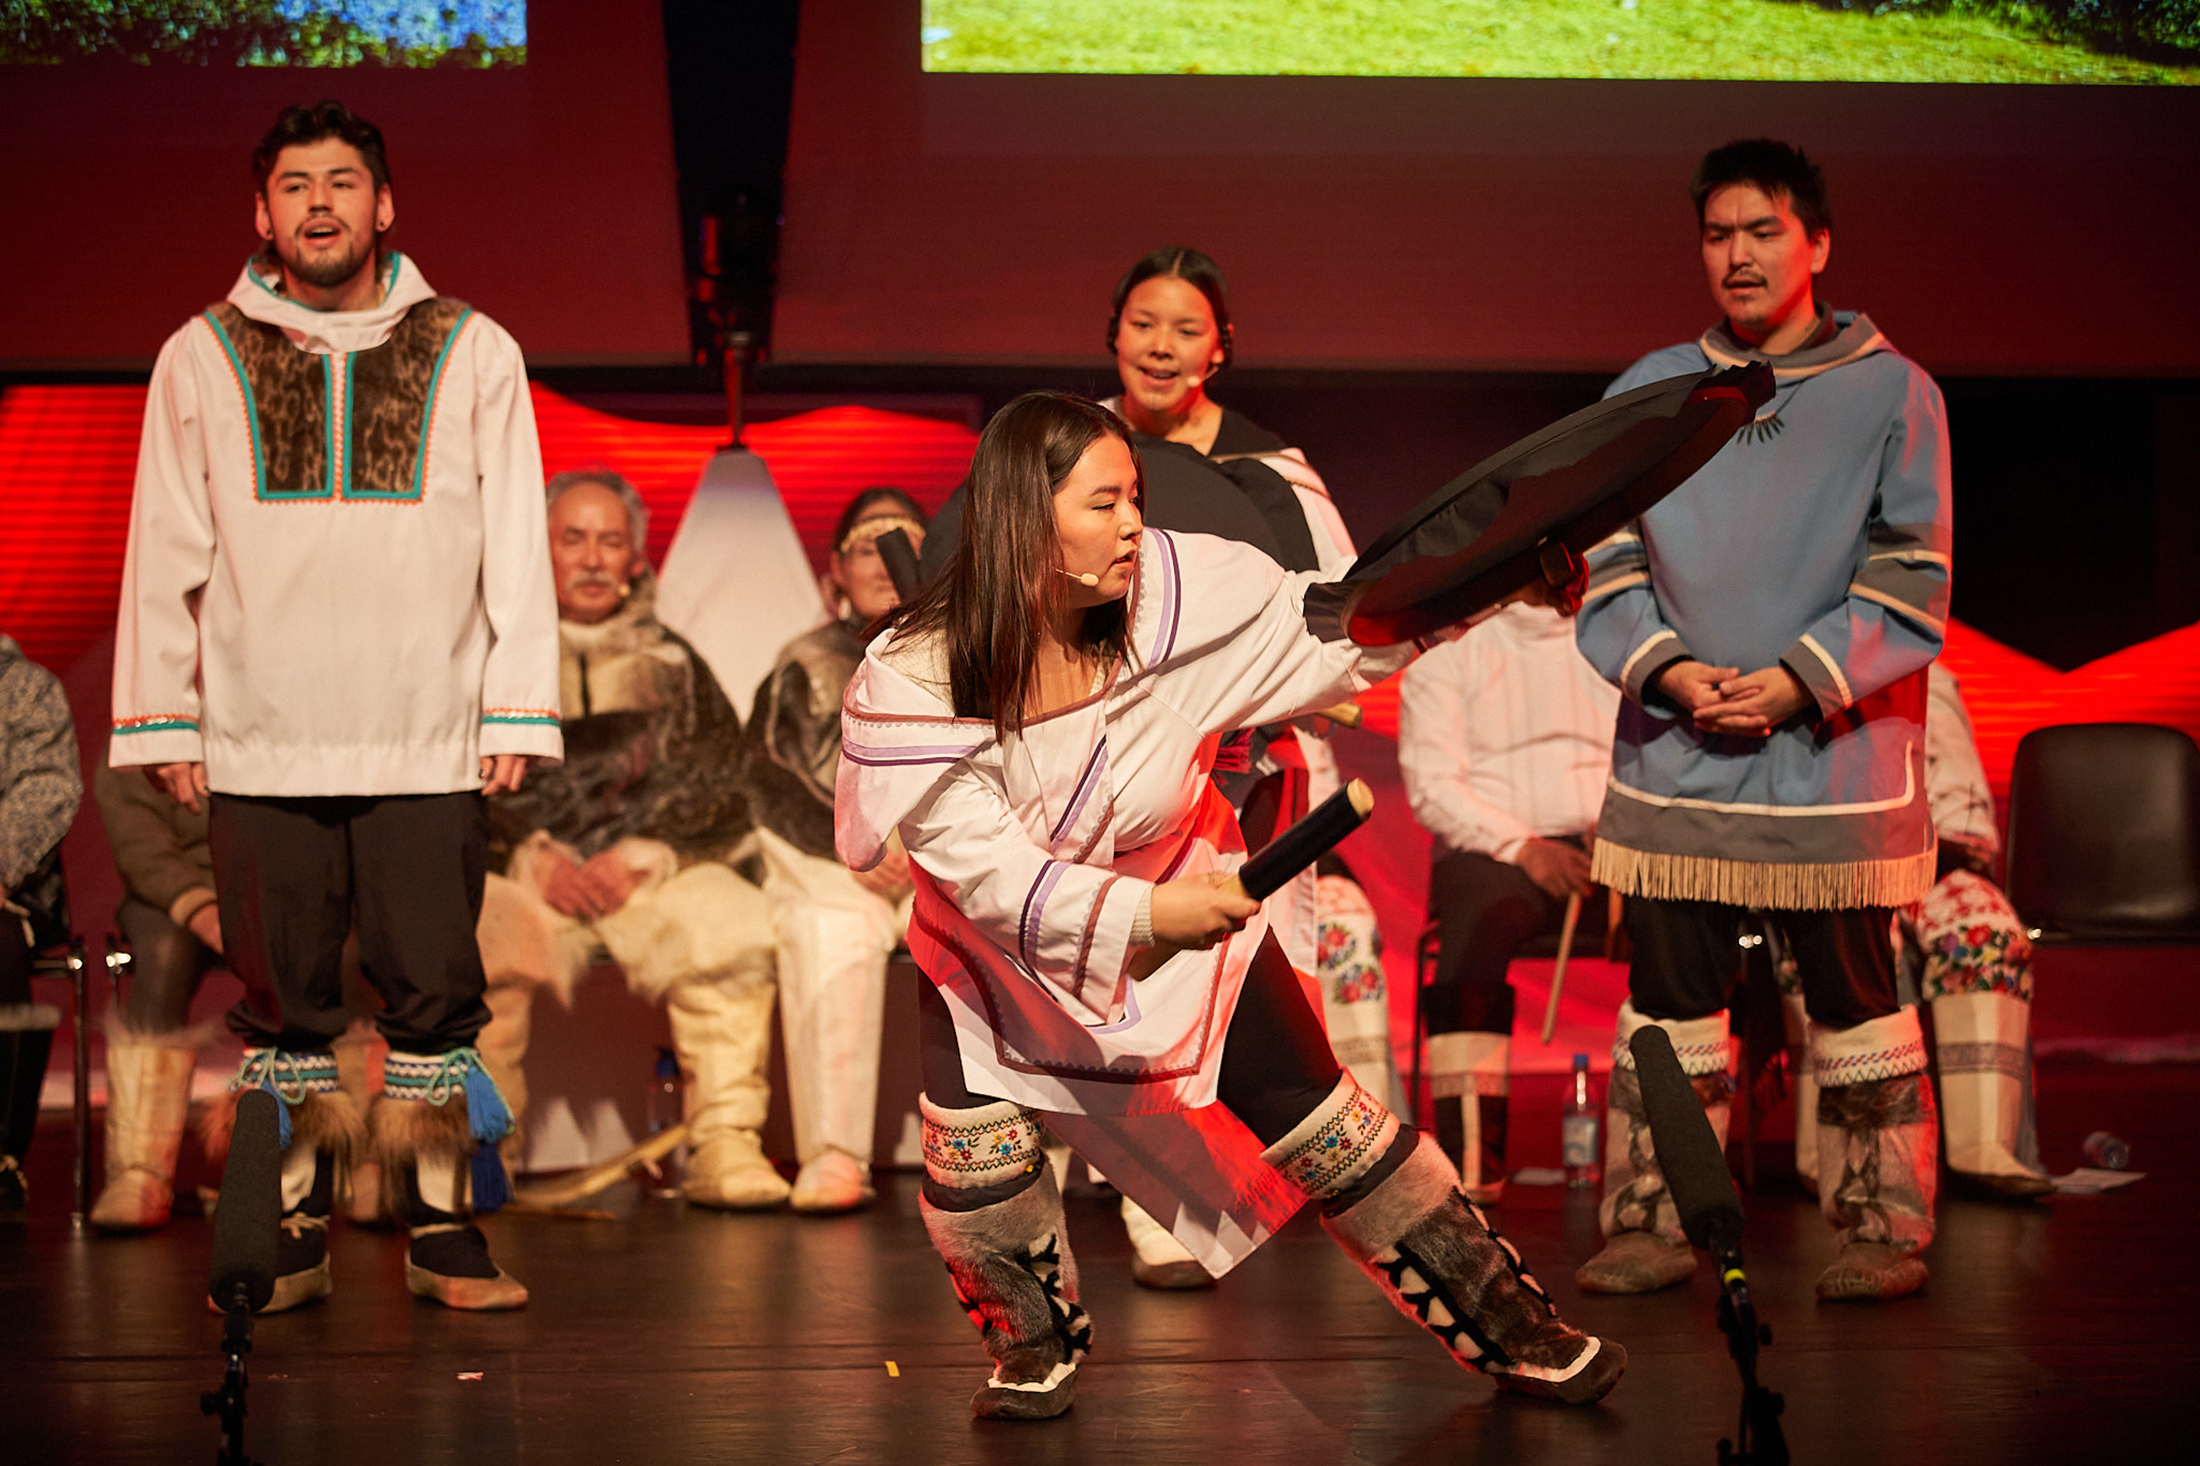 Inuit performers carrying out the traditional drum dance in Nunavut.